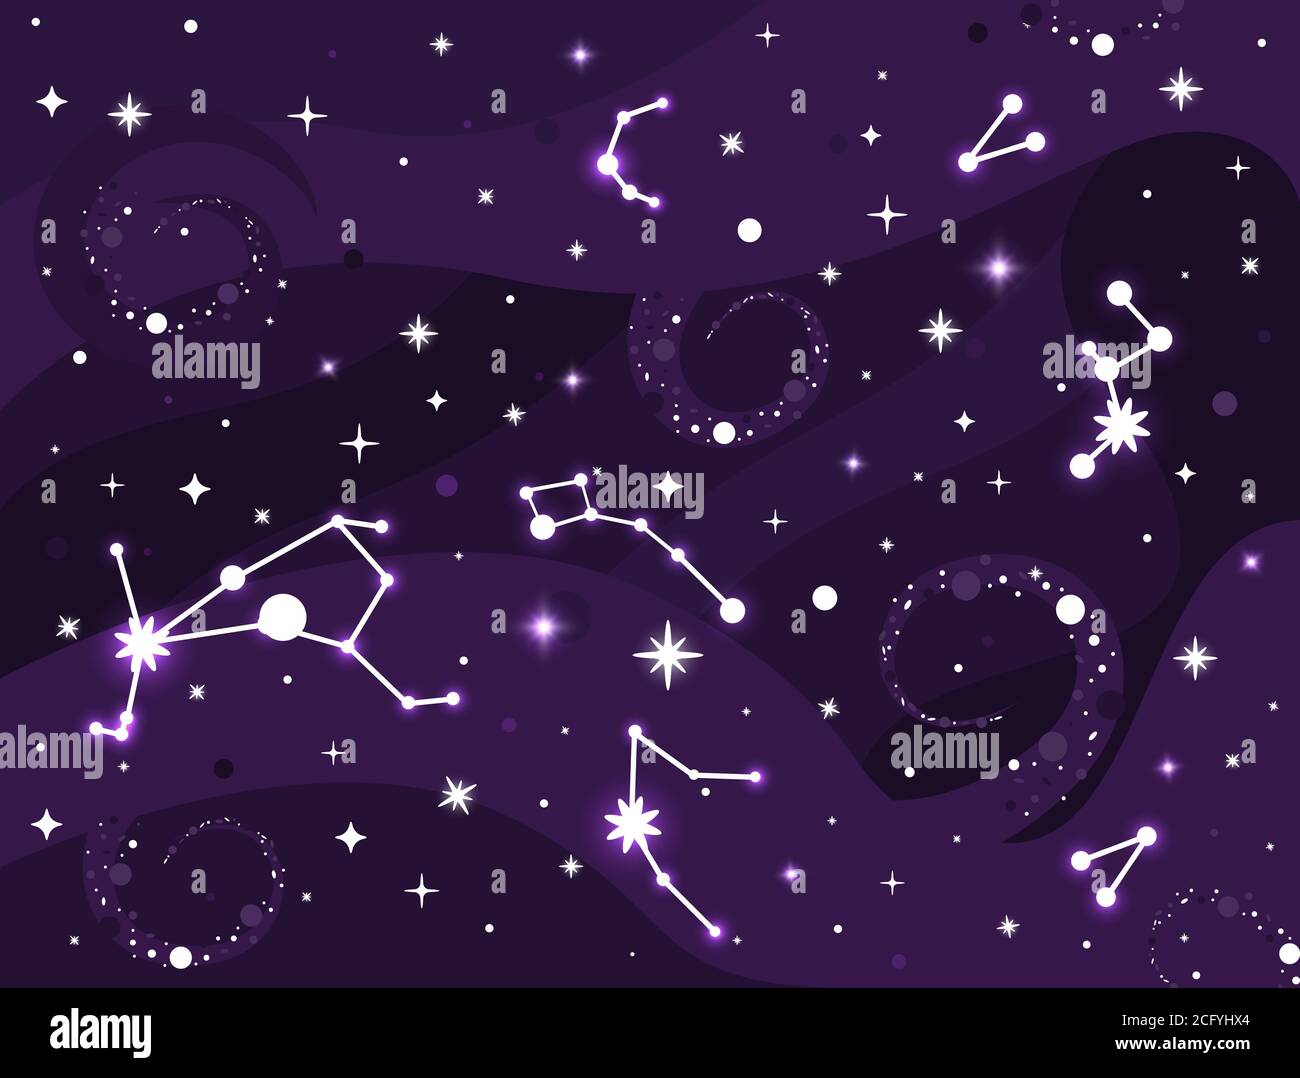 Galaxy constellation. Space background with stars, constellations, black hole, nebula. Stardust and shining stars background. Cosmic vector Stock Vector